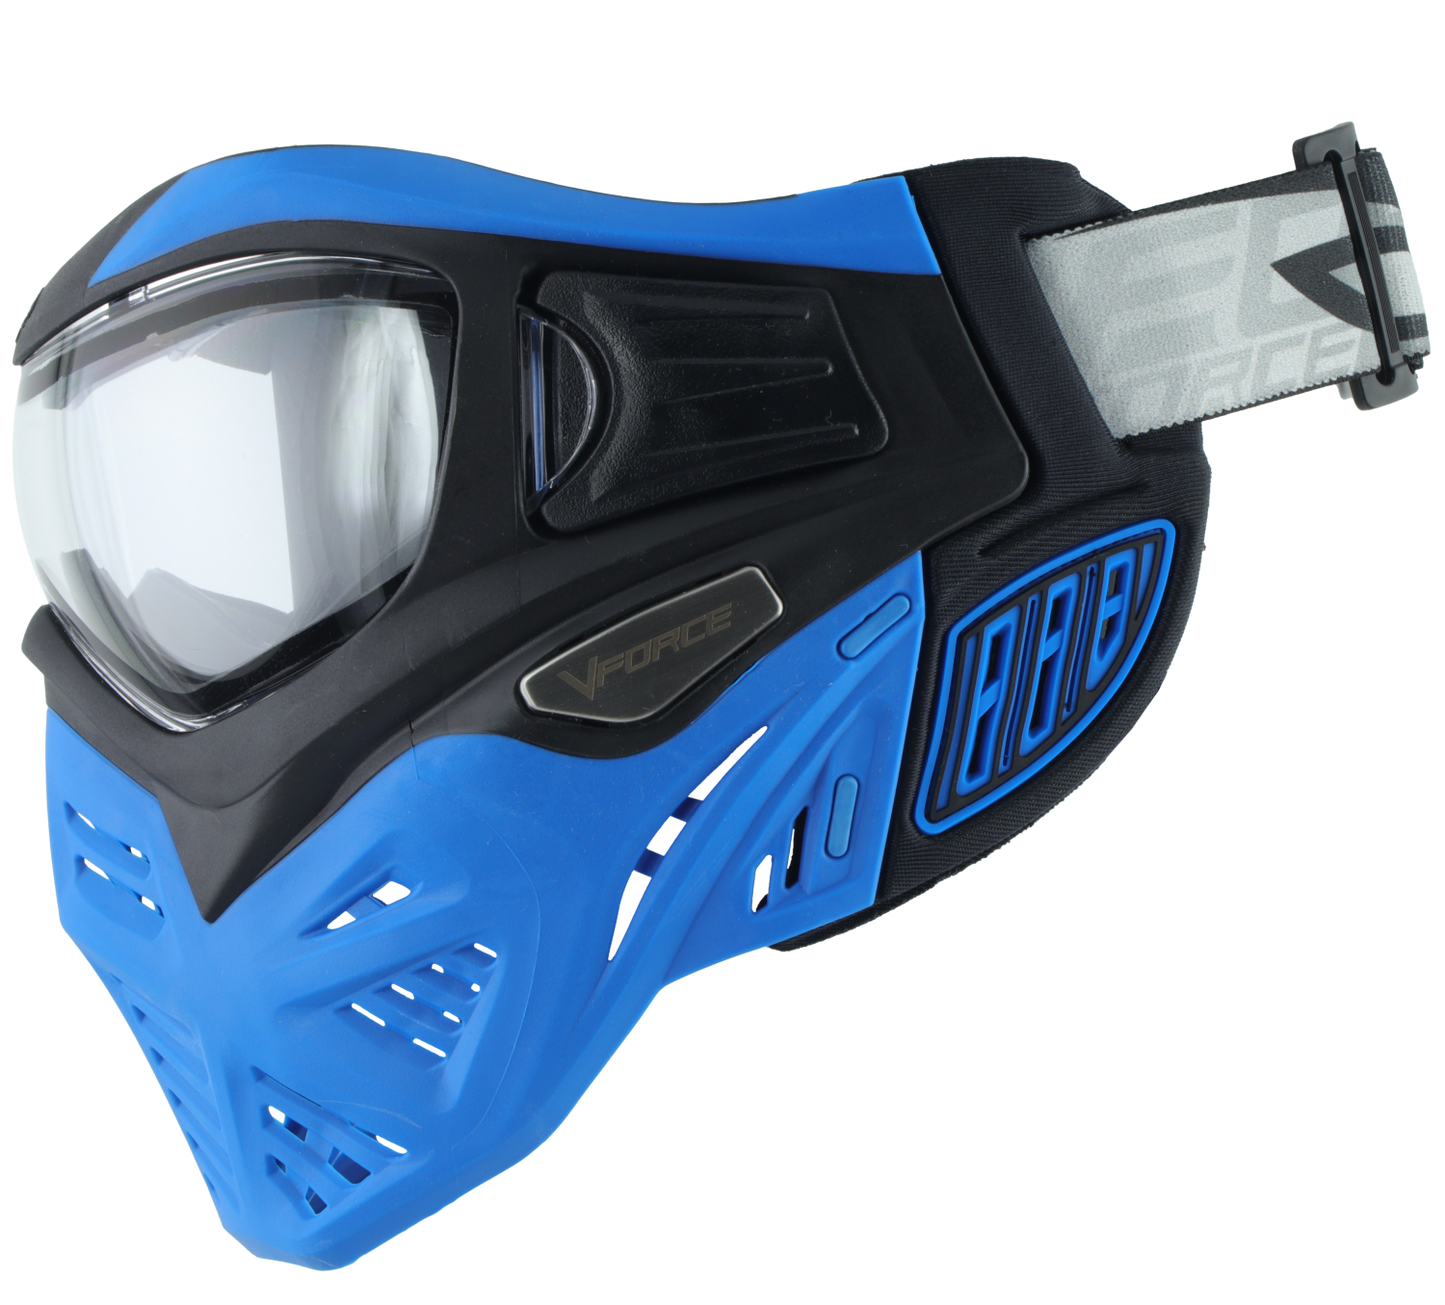 V-Force Grill 2.0 Paintball Goggle - Thermal Clear Lens - Azure (Black/Blue)